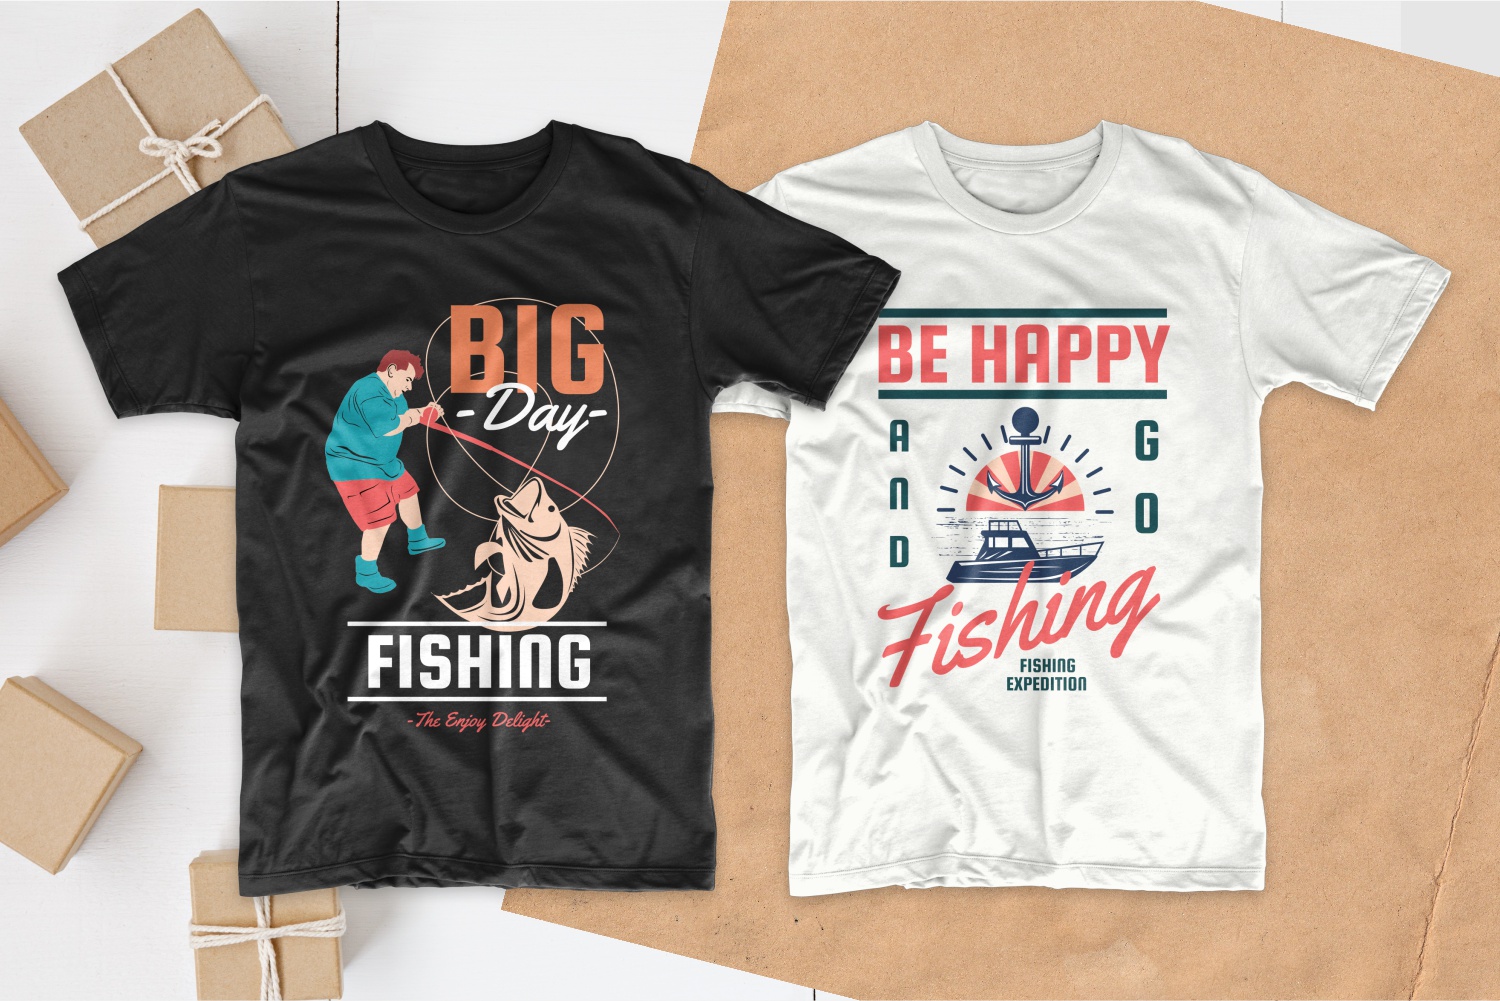 T-shirts about the love of fishing with bright and beautiful graphics.